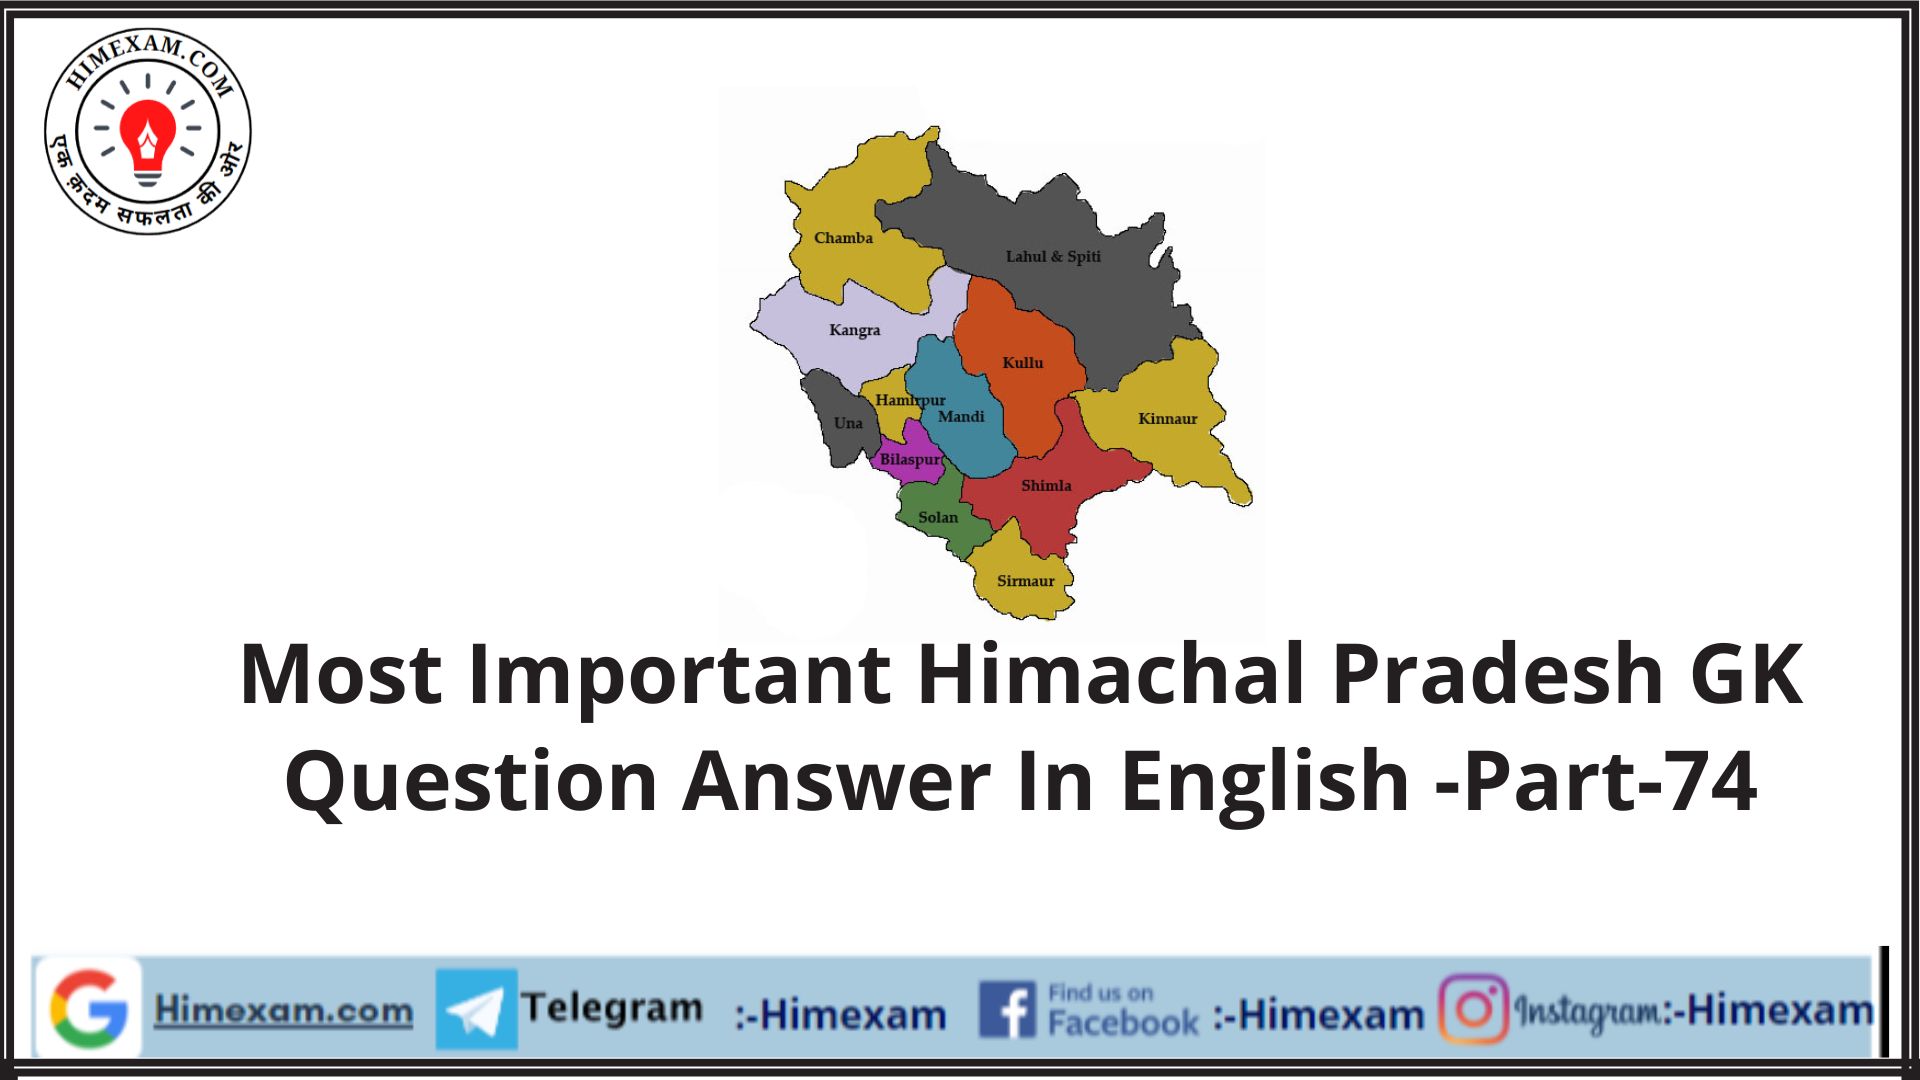 Most Important Himachal Pradesh GK Question Answer In English -Part-74